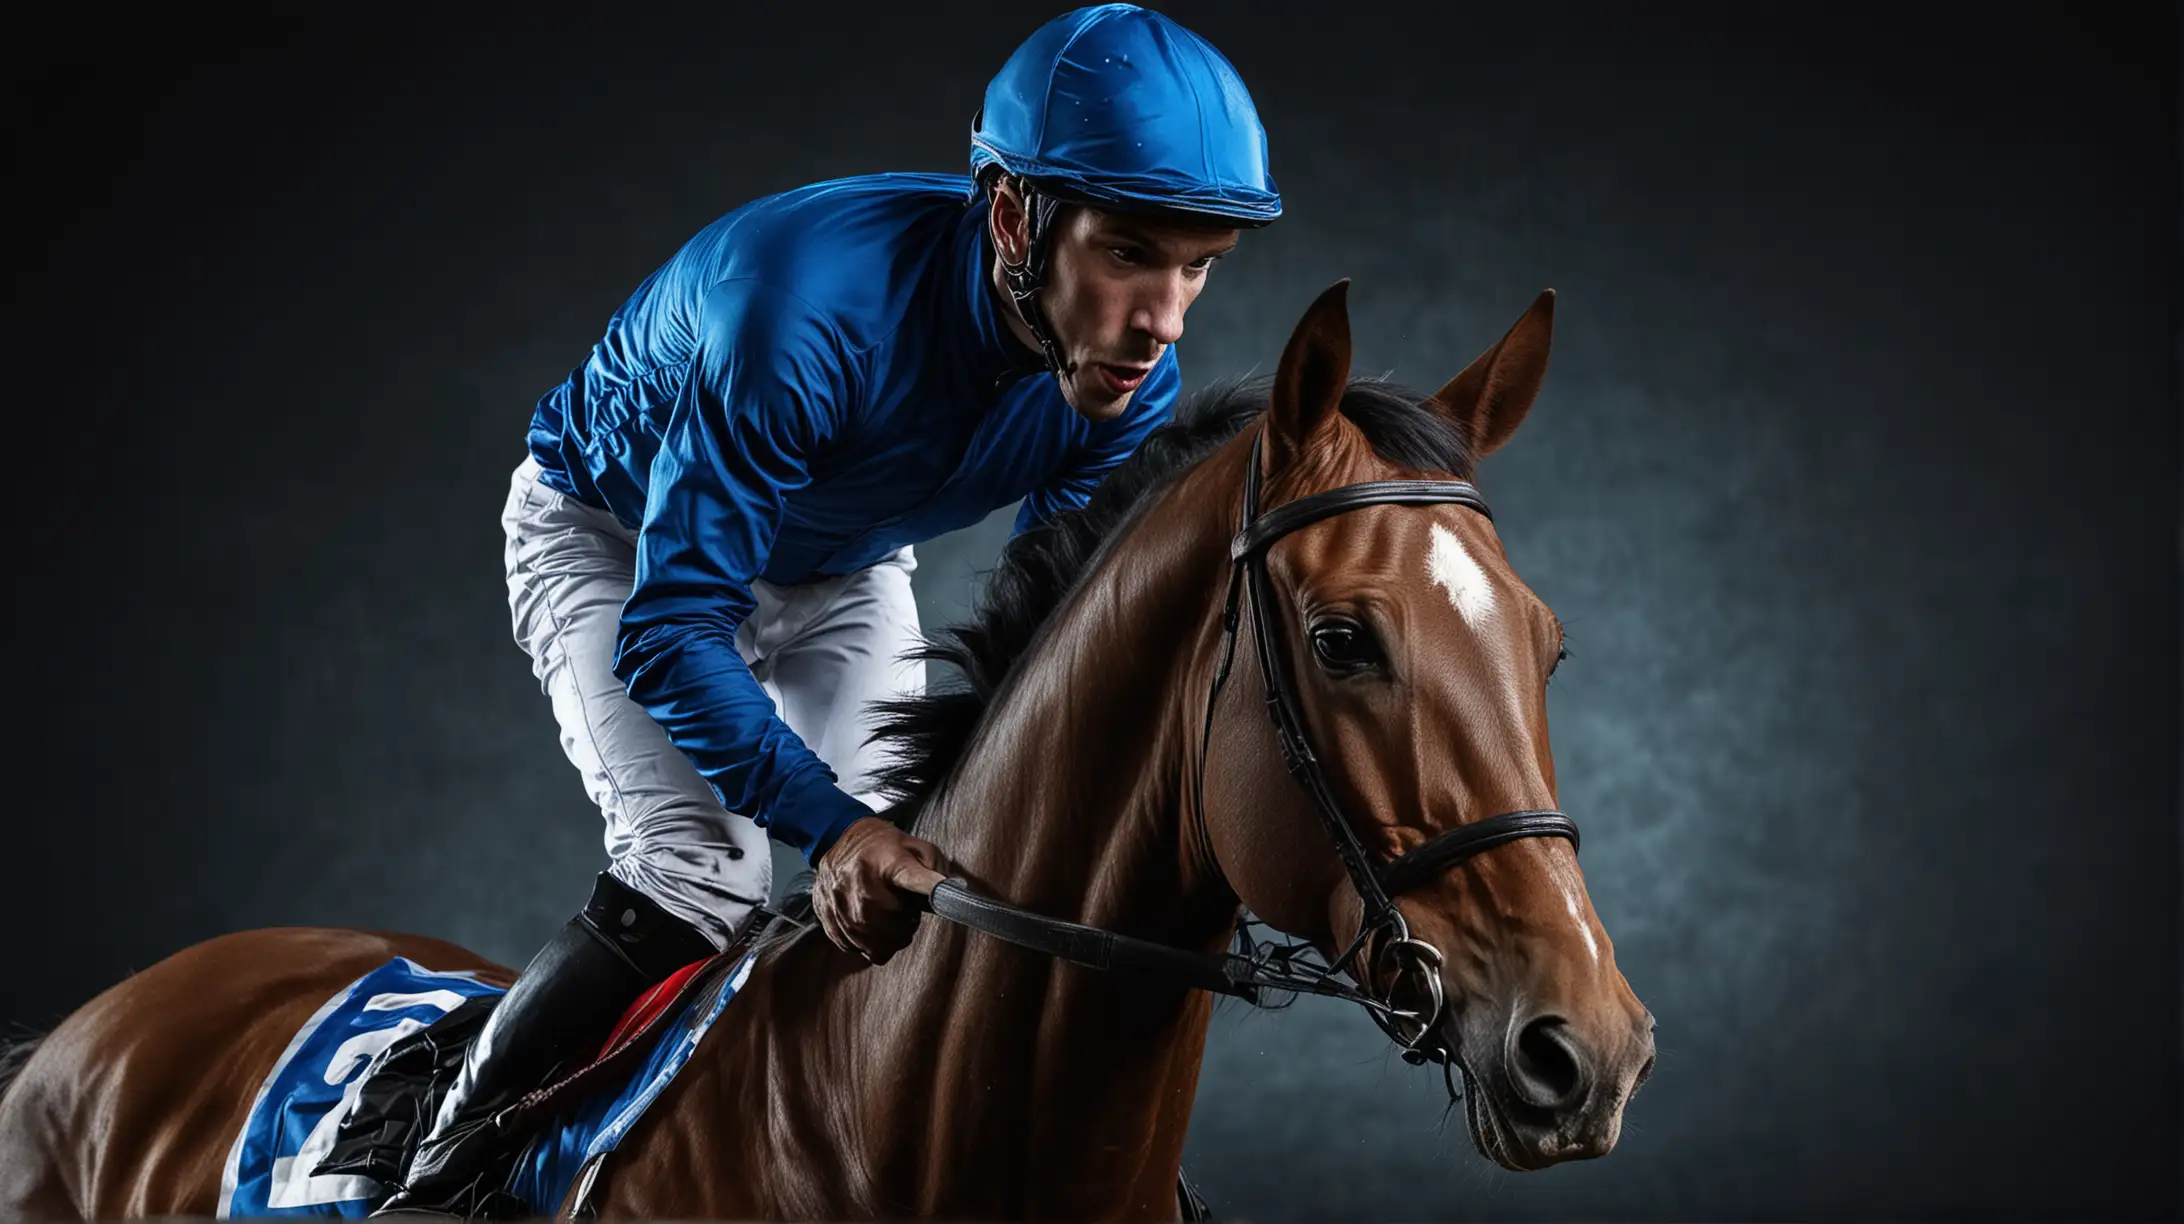 Racehorse with Jockey at Races on Dark Background